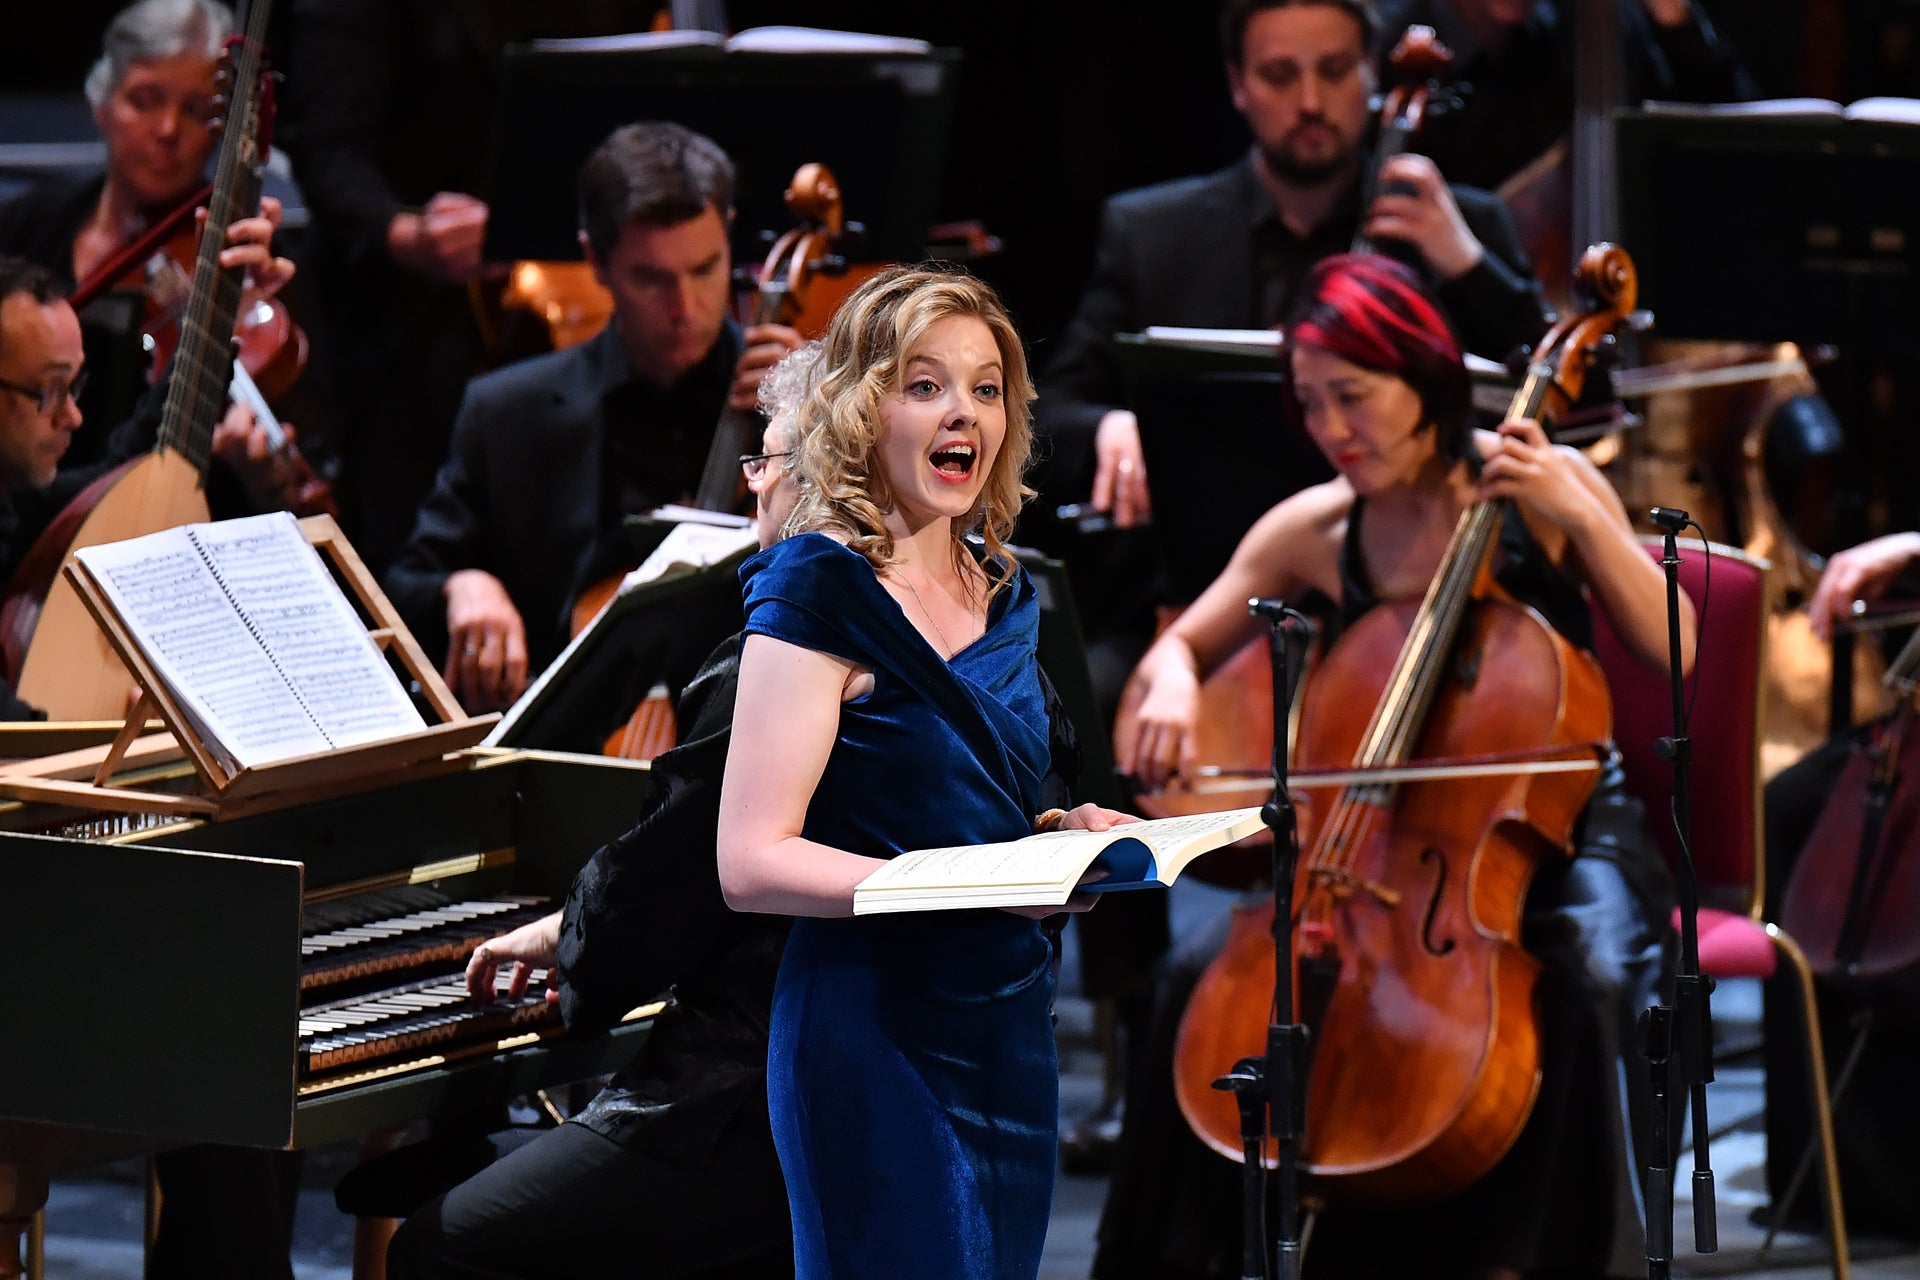 Handel’s 'Jephtha' is performed at the BBC Proms